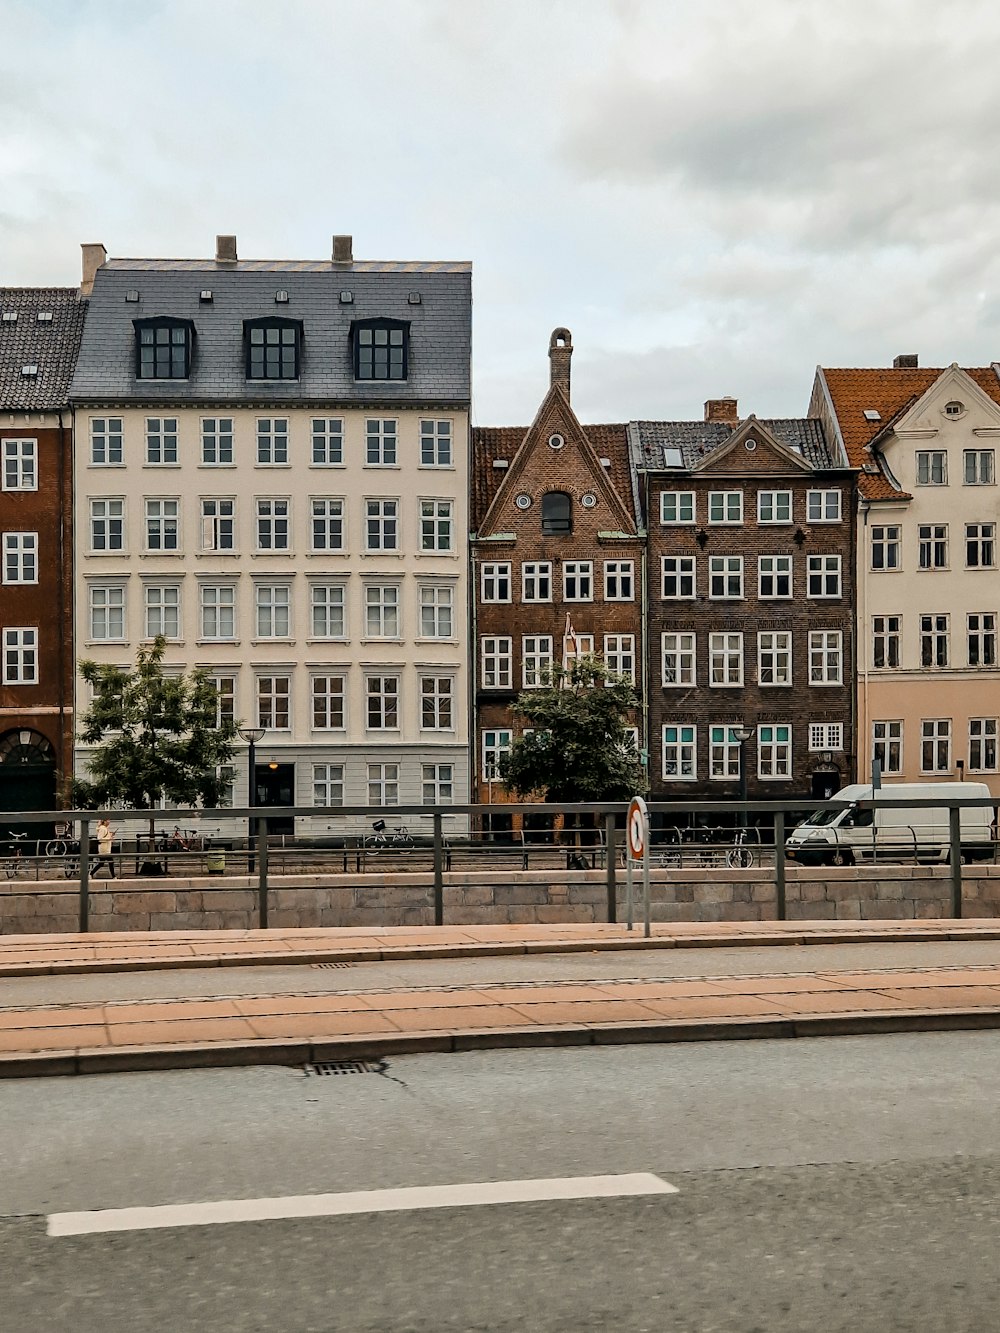 a row of buildings on the side of a road